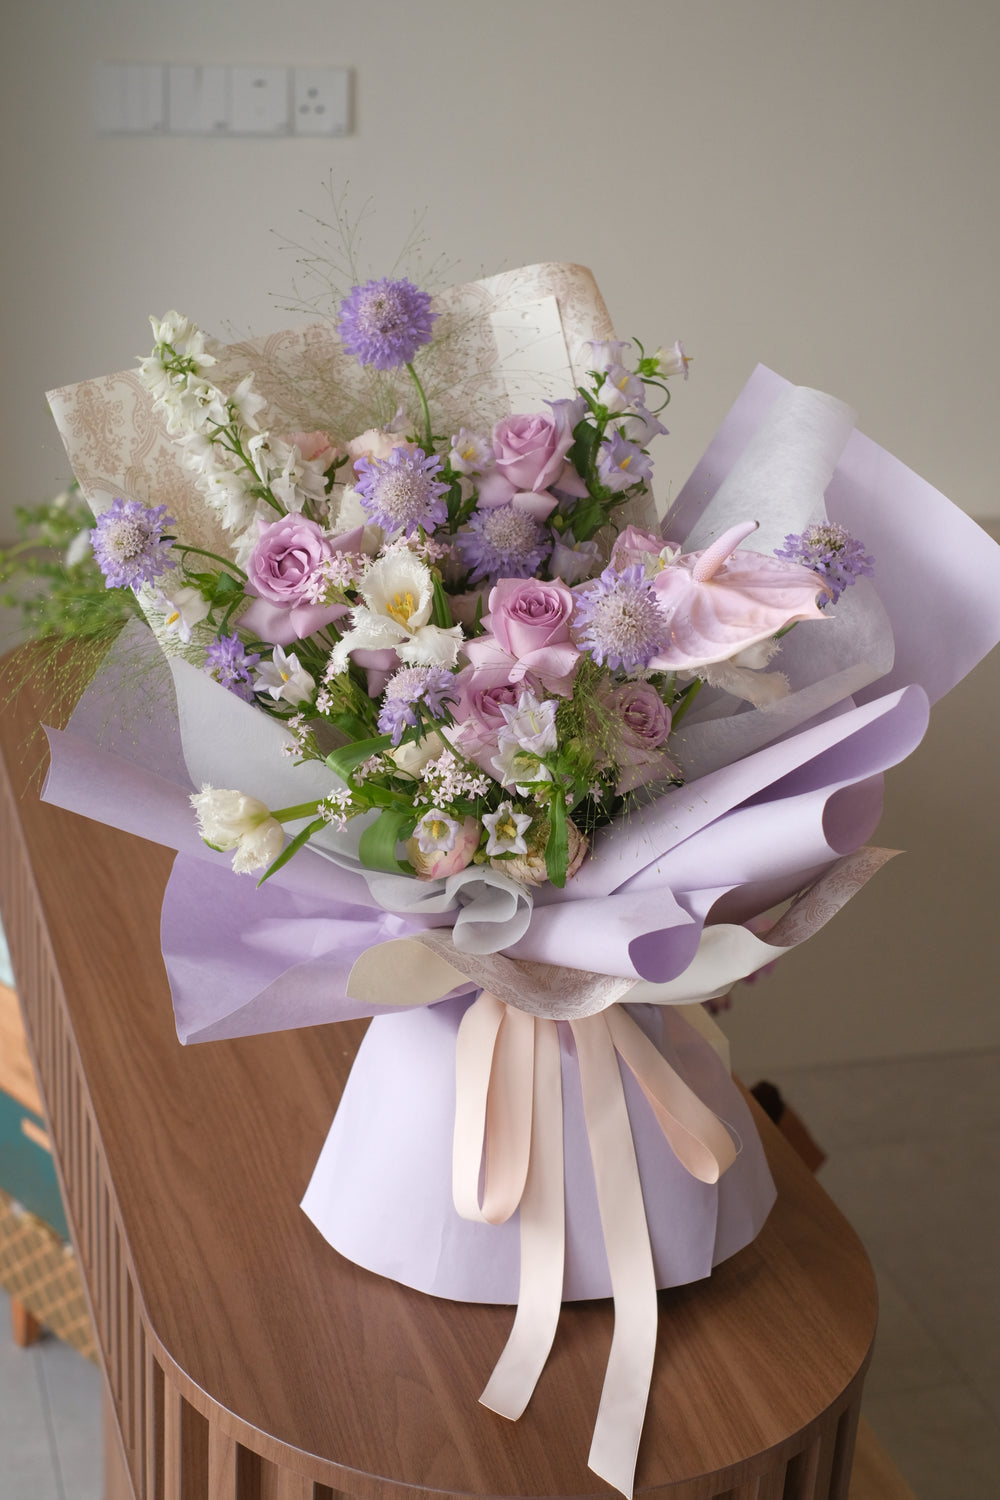 "Exquisite omakase arrangement of purple flowers for delivery in Penang Island."